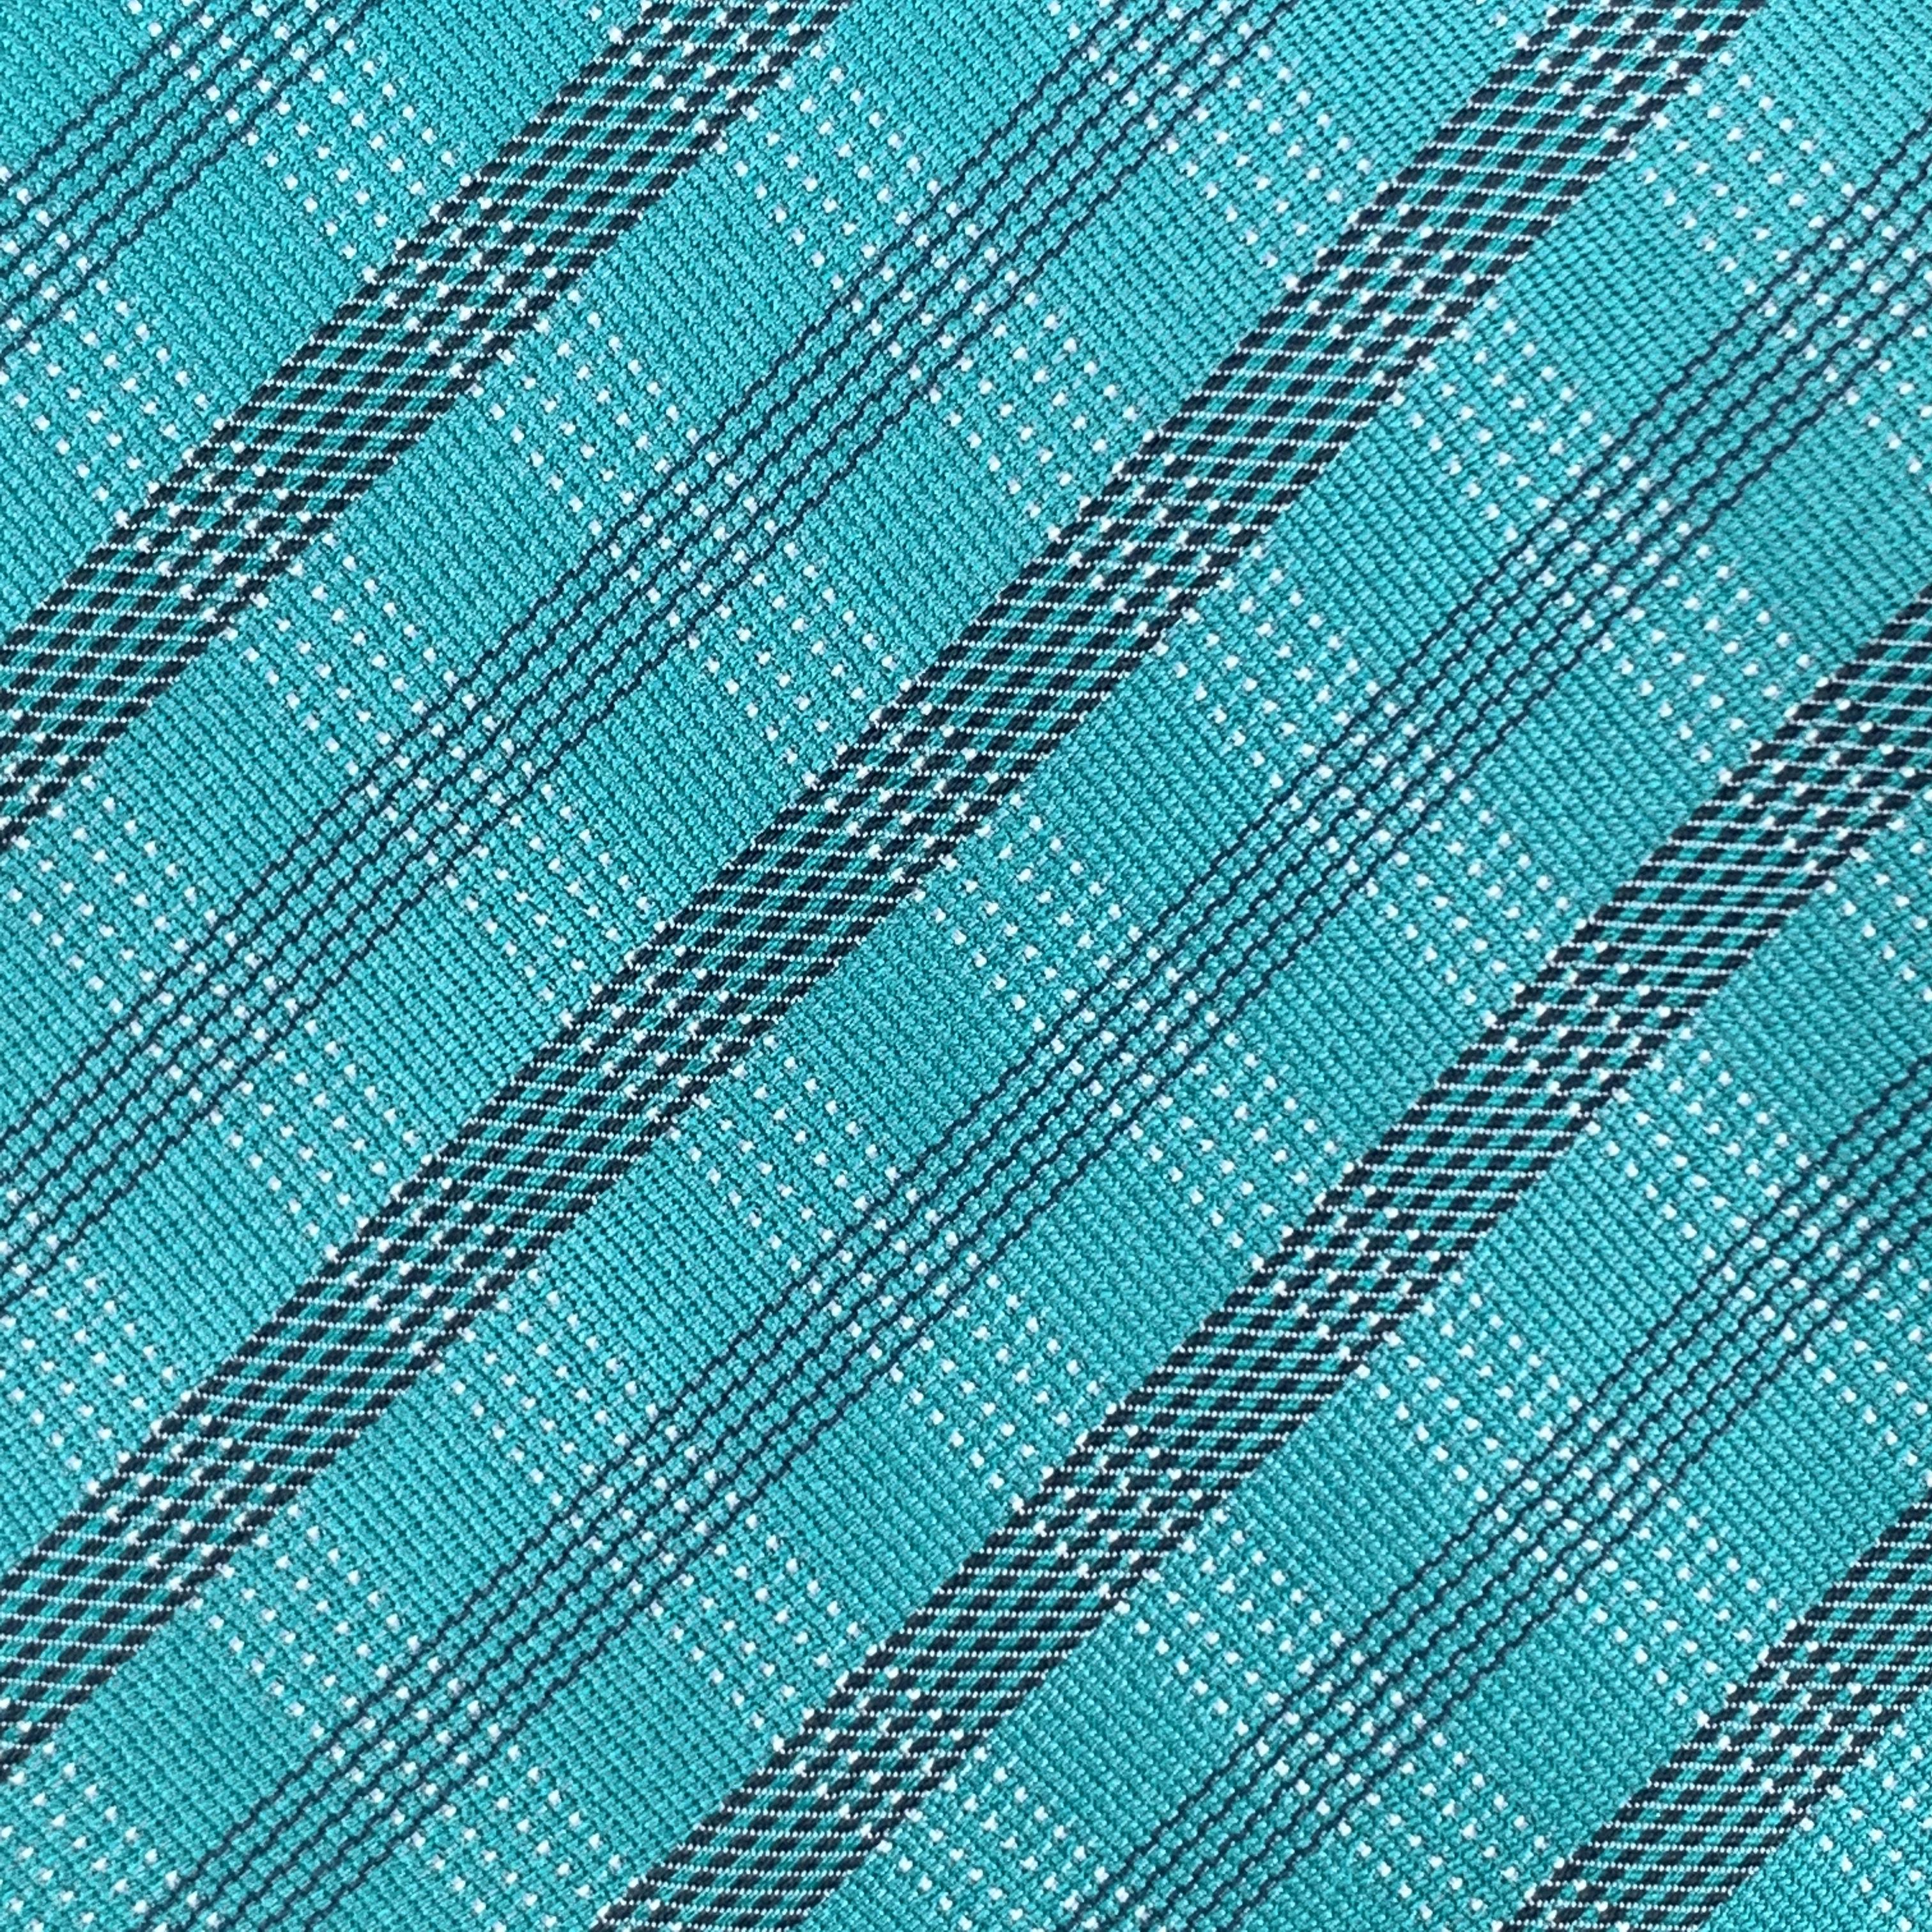 ARMANI EXCHANGE necktie comes in aqua blue silk twill with all over plaid print. Made in Italy.

Excellent Pre-Owned Condition.

Width: 3.5 in.